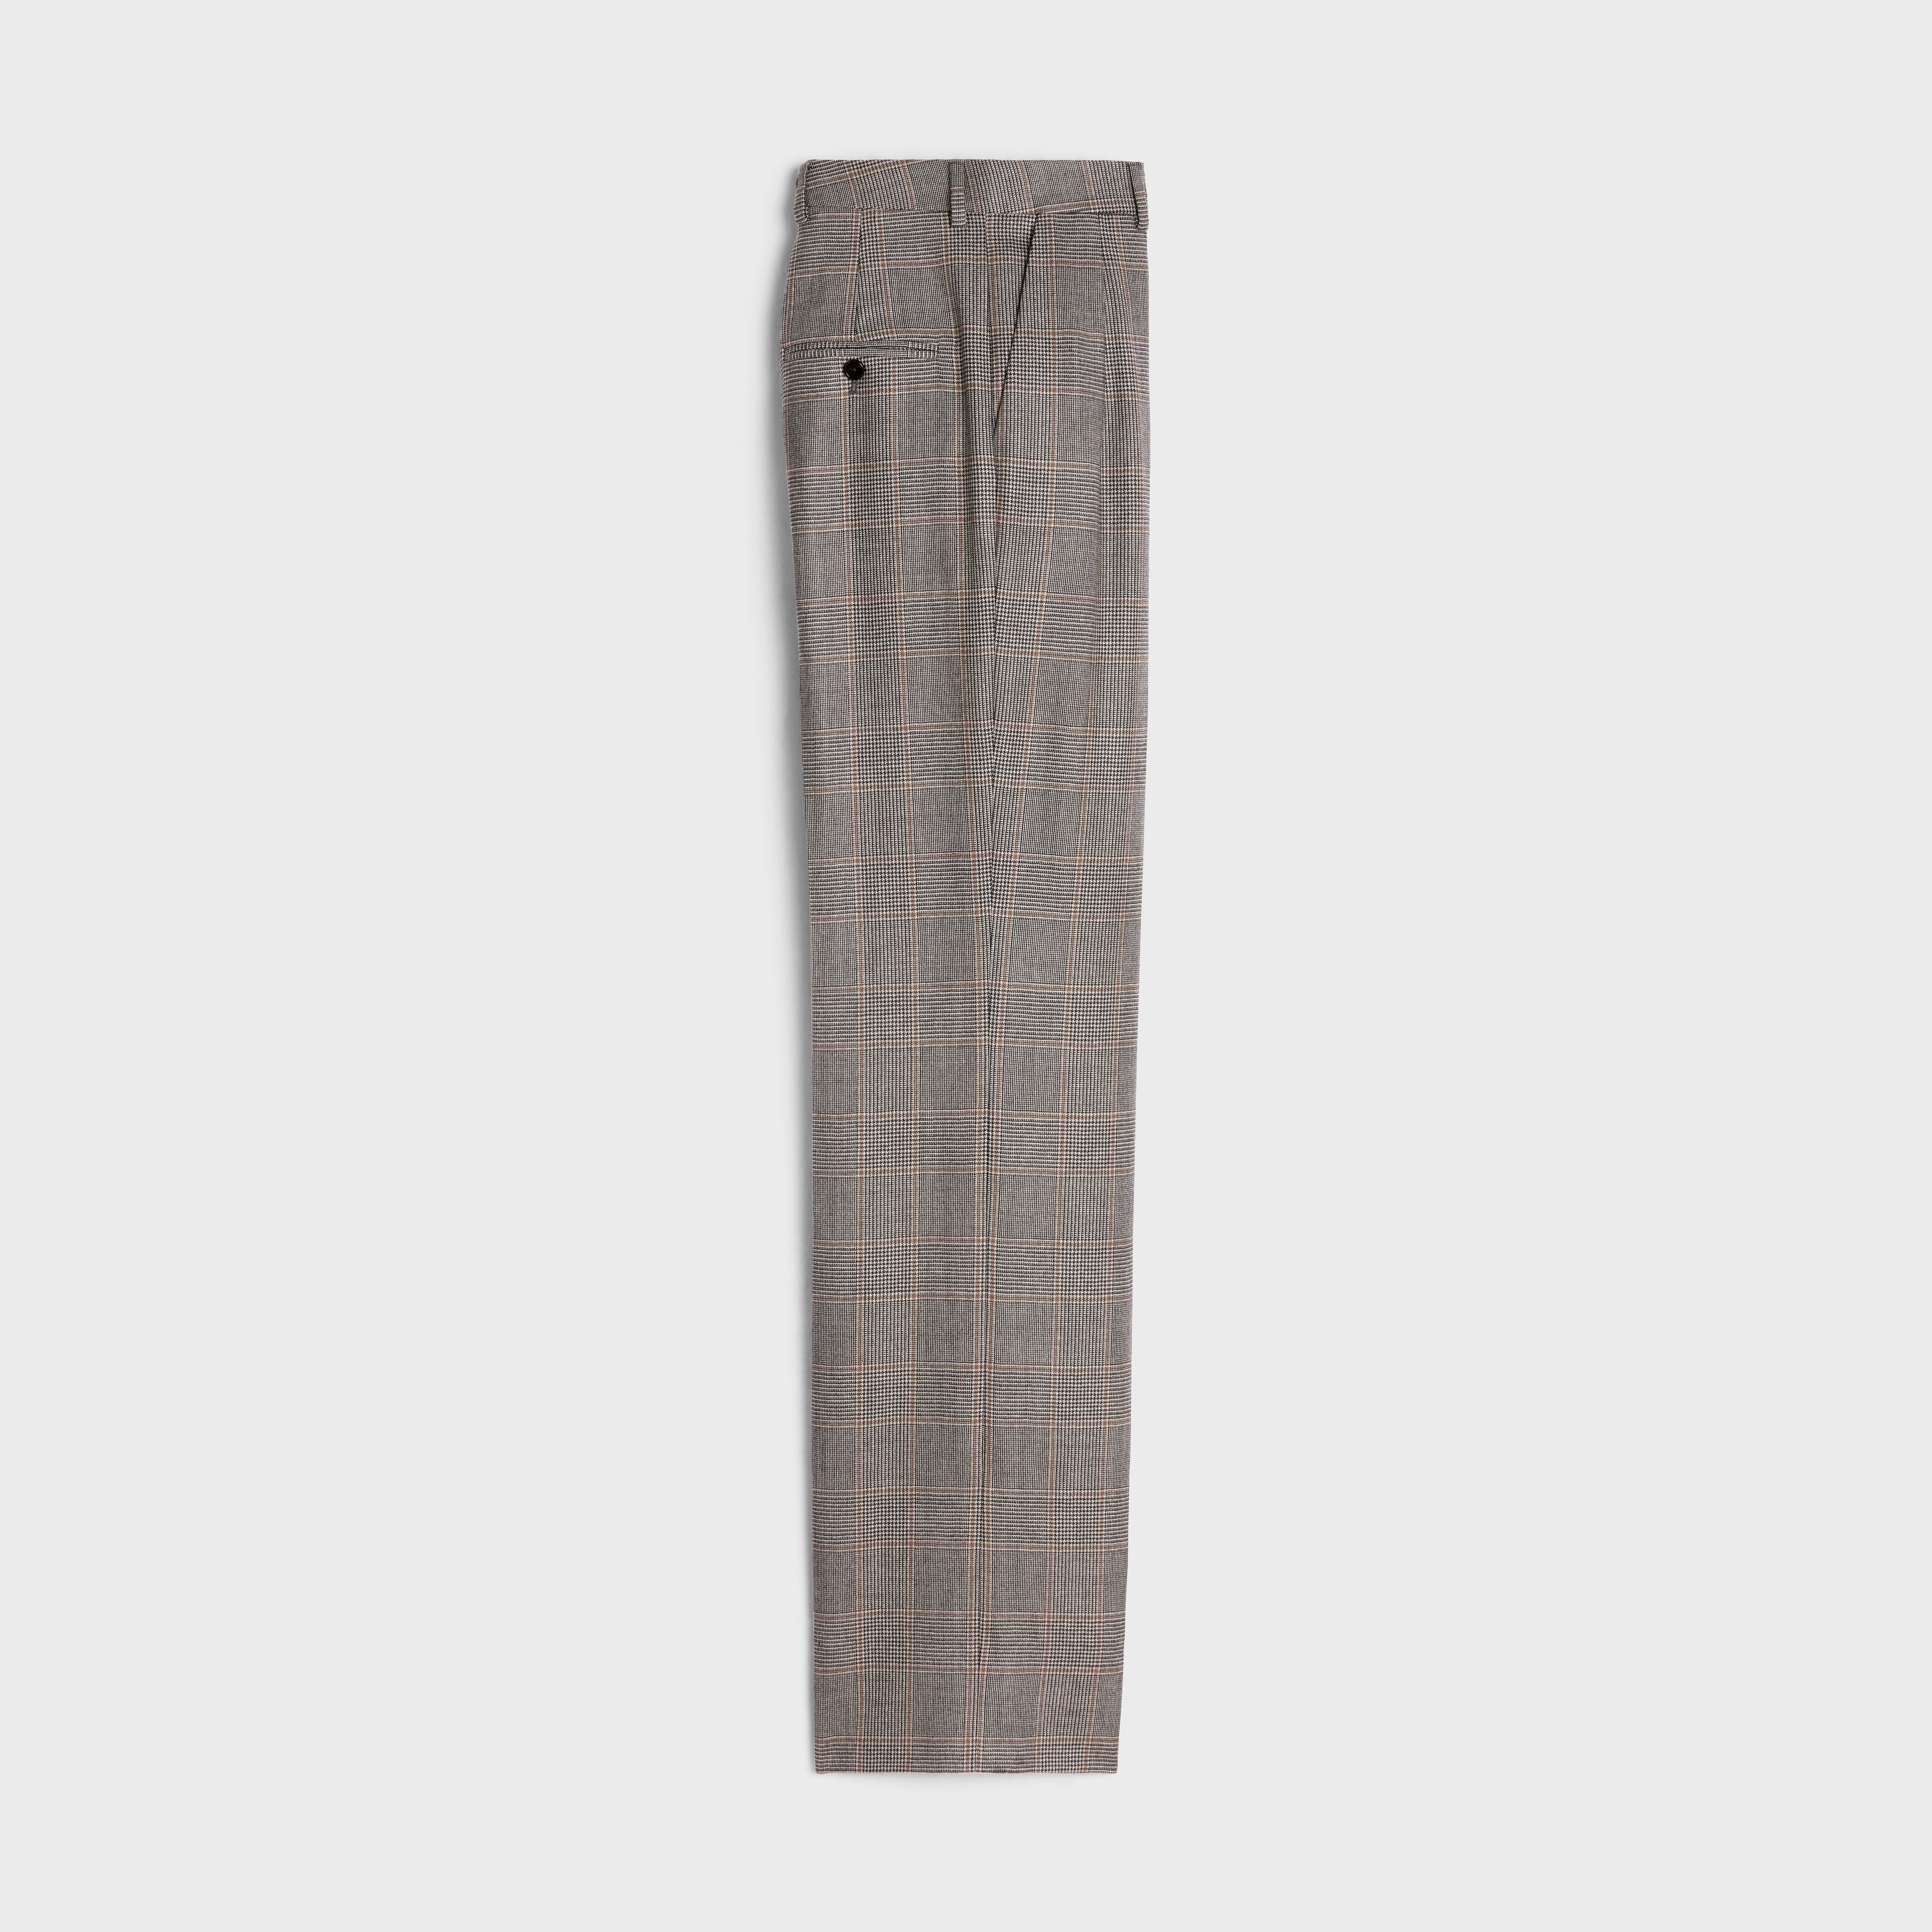 CELINE Double-pleated Tixie pants in checked flannel, celine